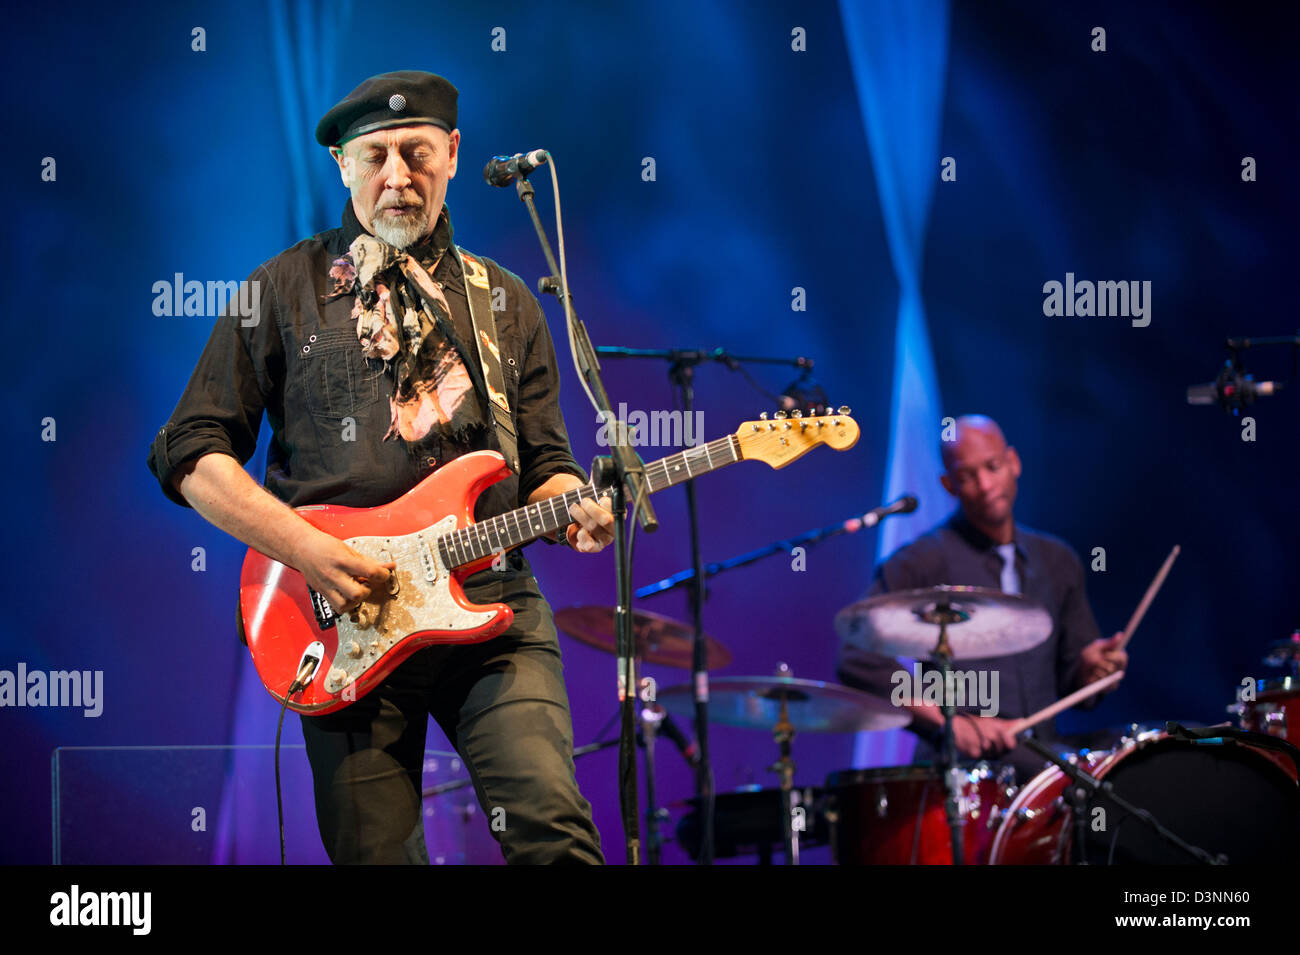 Birmingham, UK. 21st February 2013.  Singer-songwriter and guitarist Richard Thompson with his Electric Trio in concert at Birmingham Symphony Hall, promoting new Album 'Electric'. Credit: John Bentley/Alamy Live News Stock Photo